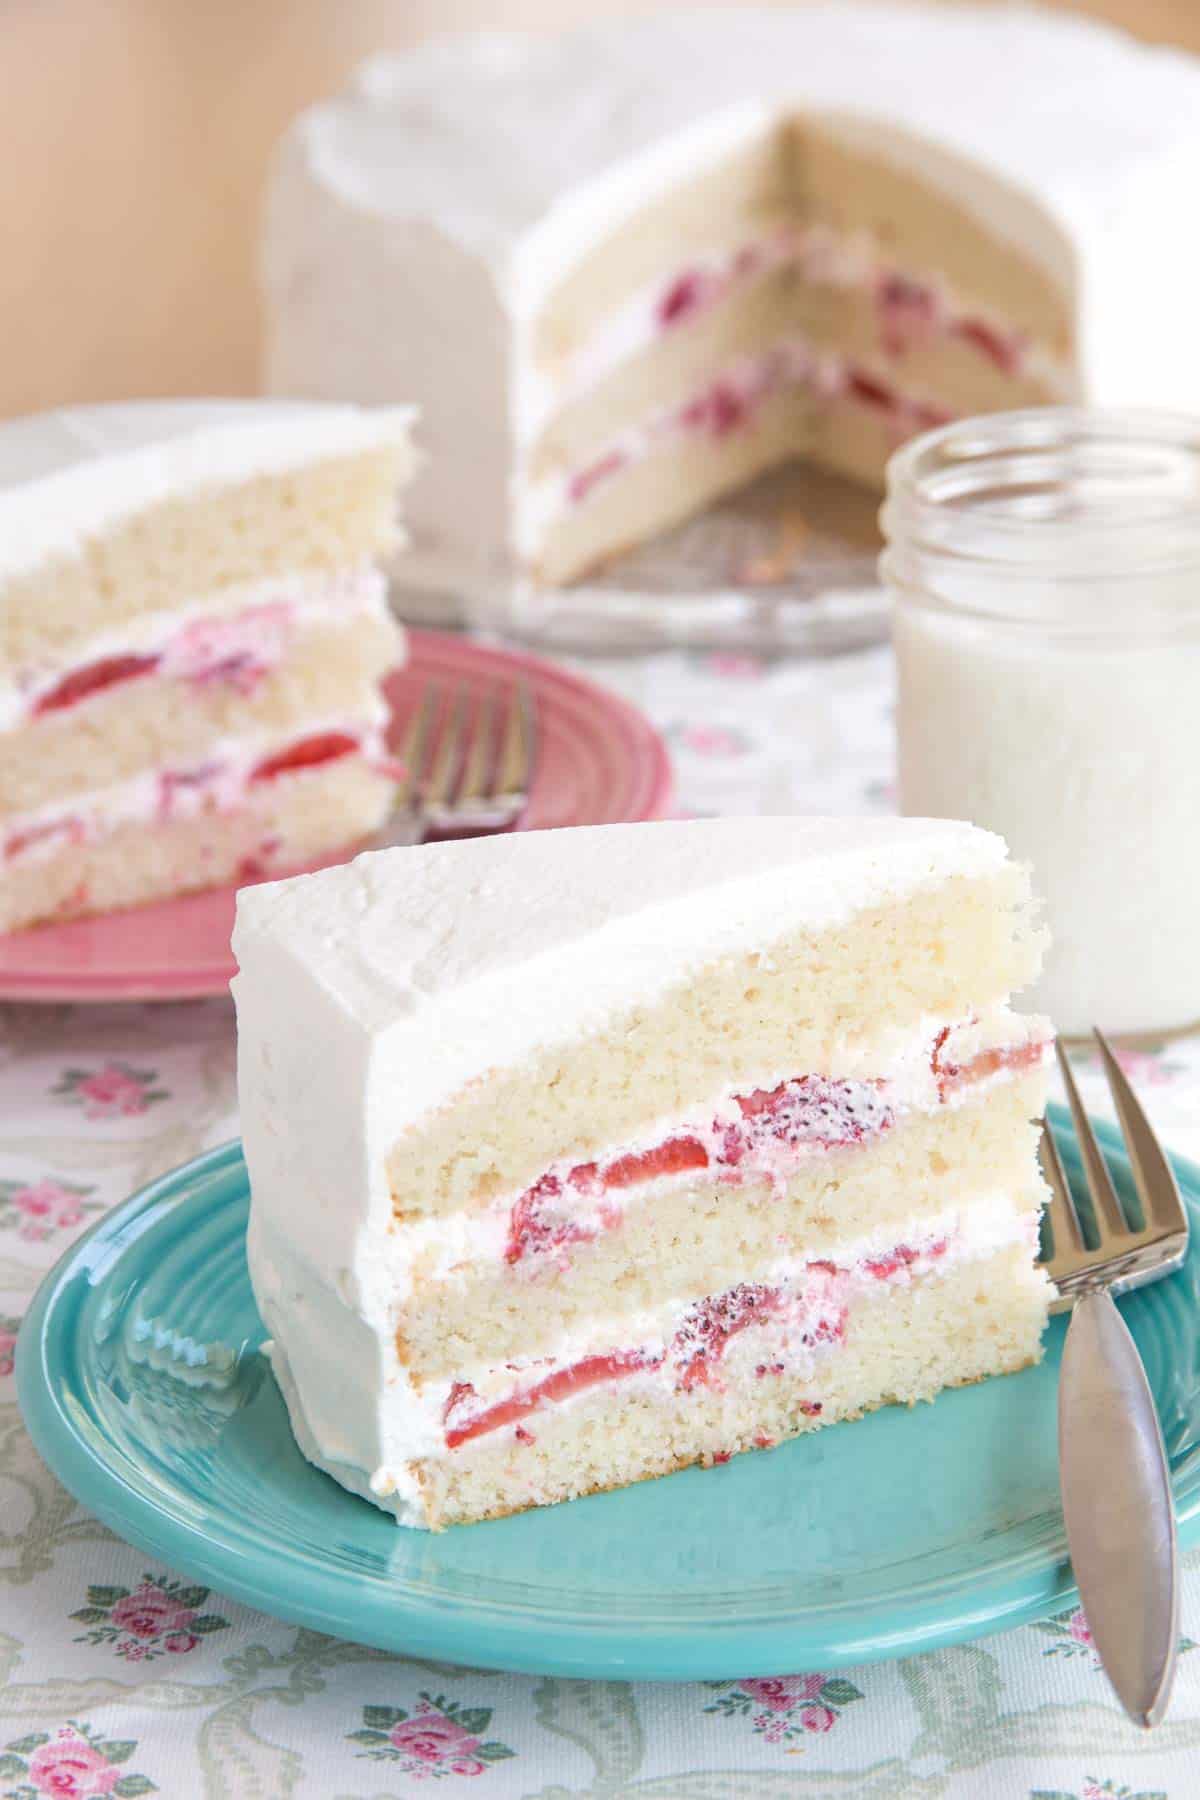 Strawberries and Cream Cake is one of the Best Easter Dessert Recipes for Spring